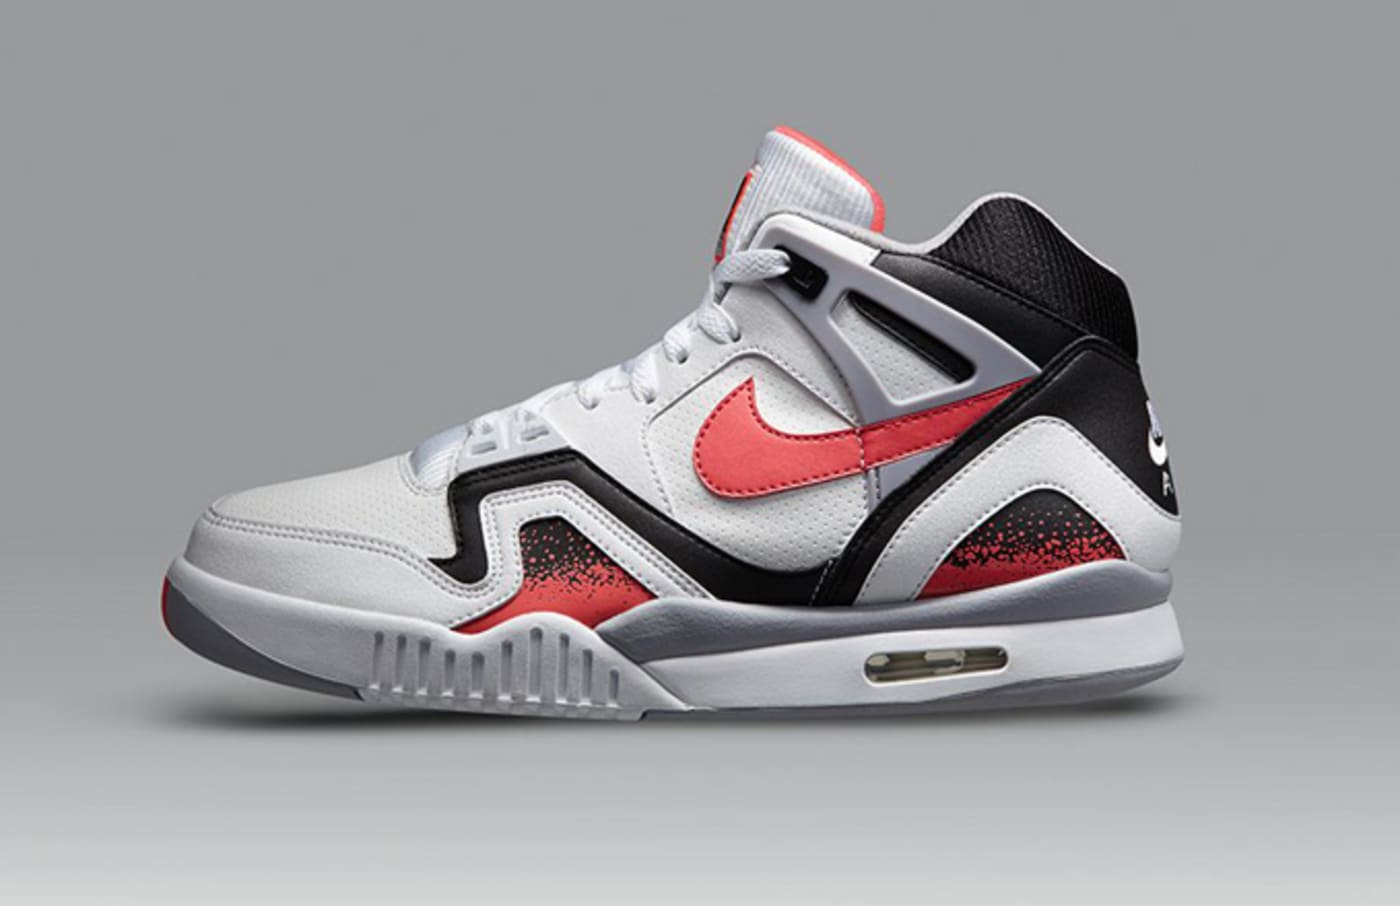 Andre Agassi Reminisces on the “Hot Lava” Nike Tech Challenge II | Complex